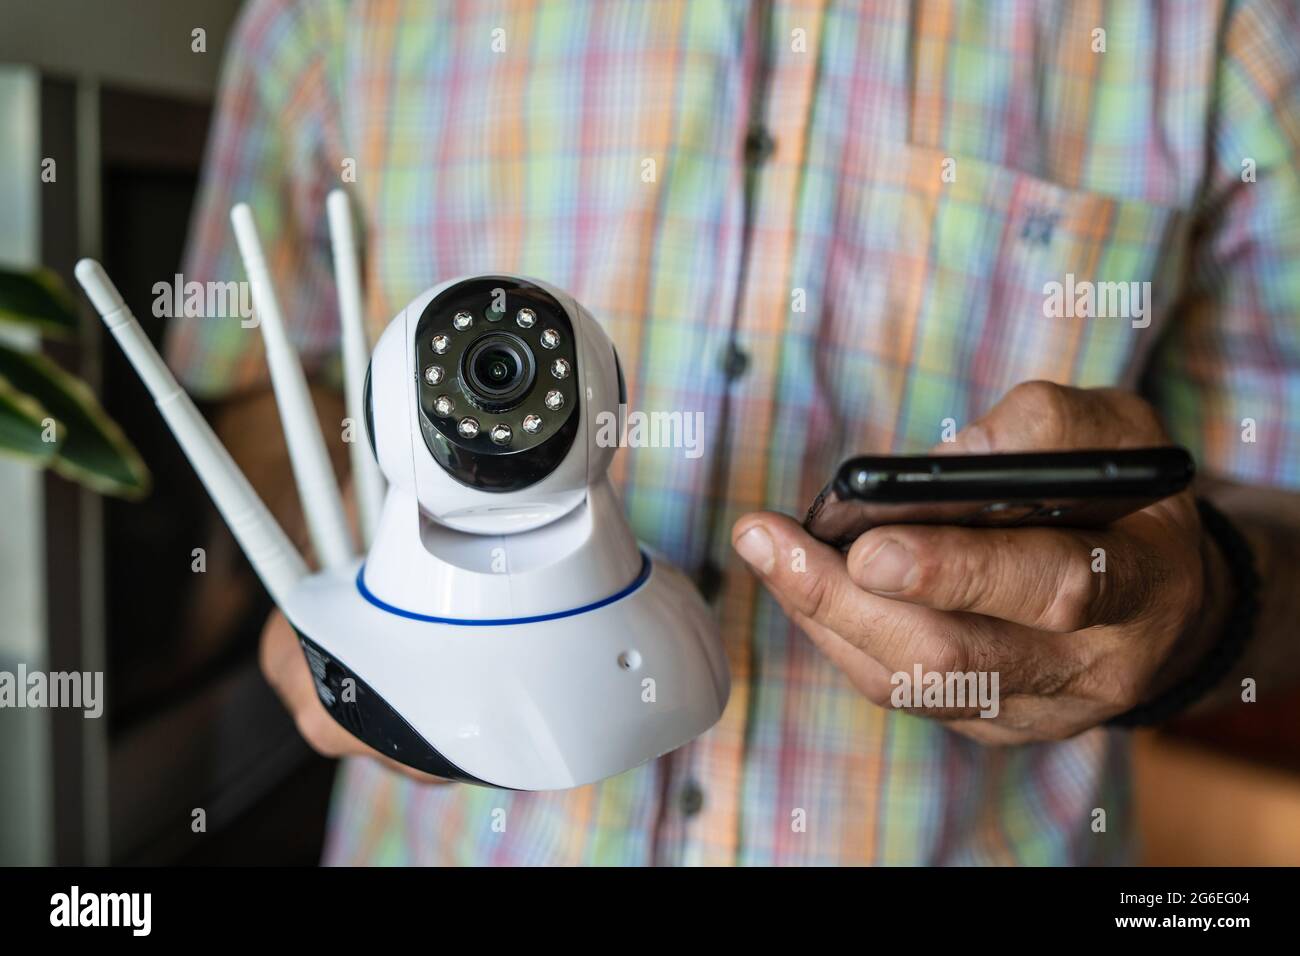 Close up on midsection of unknown man holding home security surveillance camera and mobile phone trying to install an app front view copy space Stock Photo